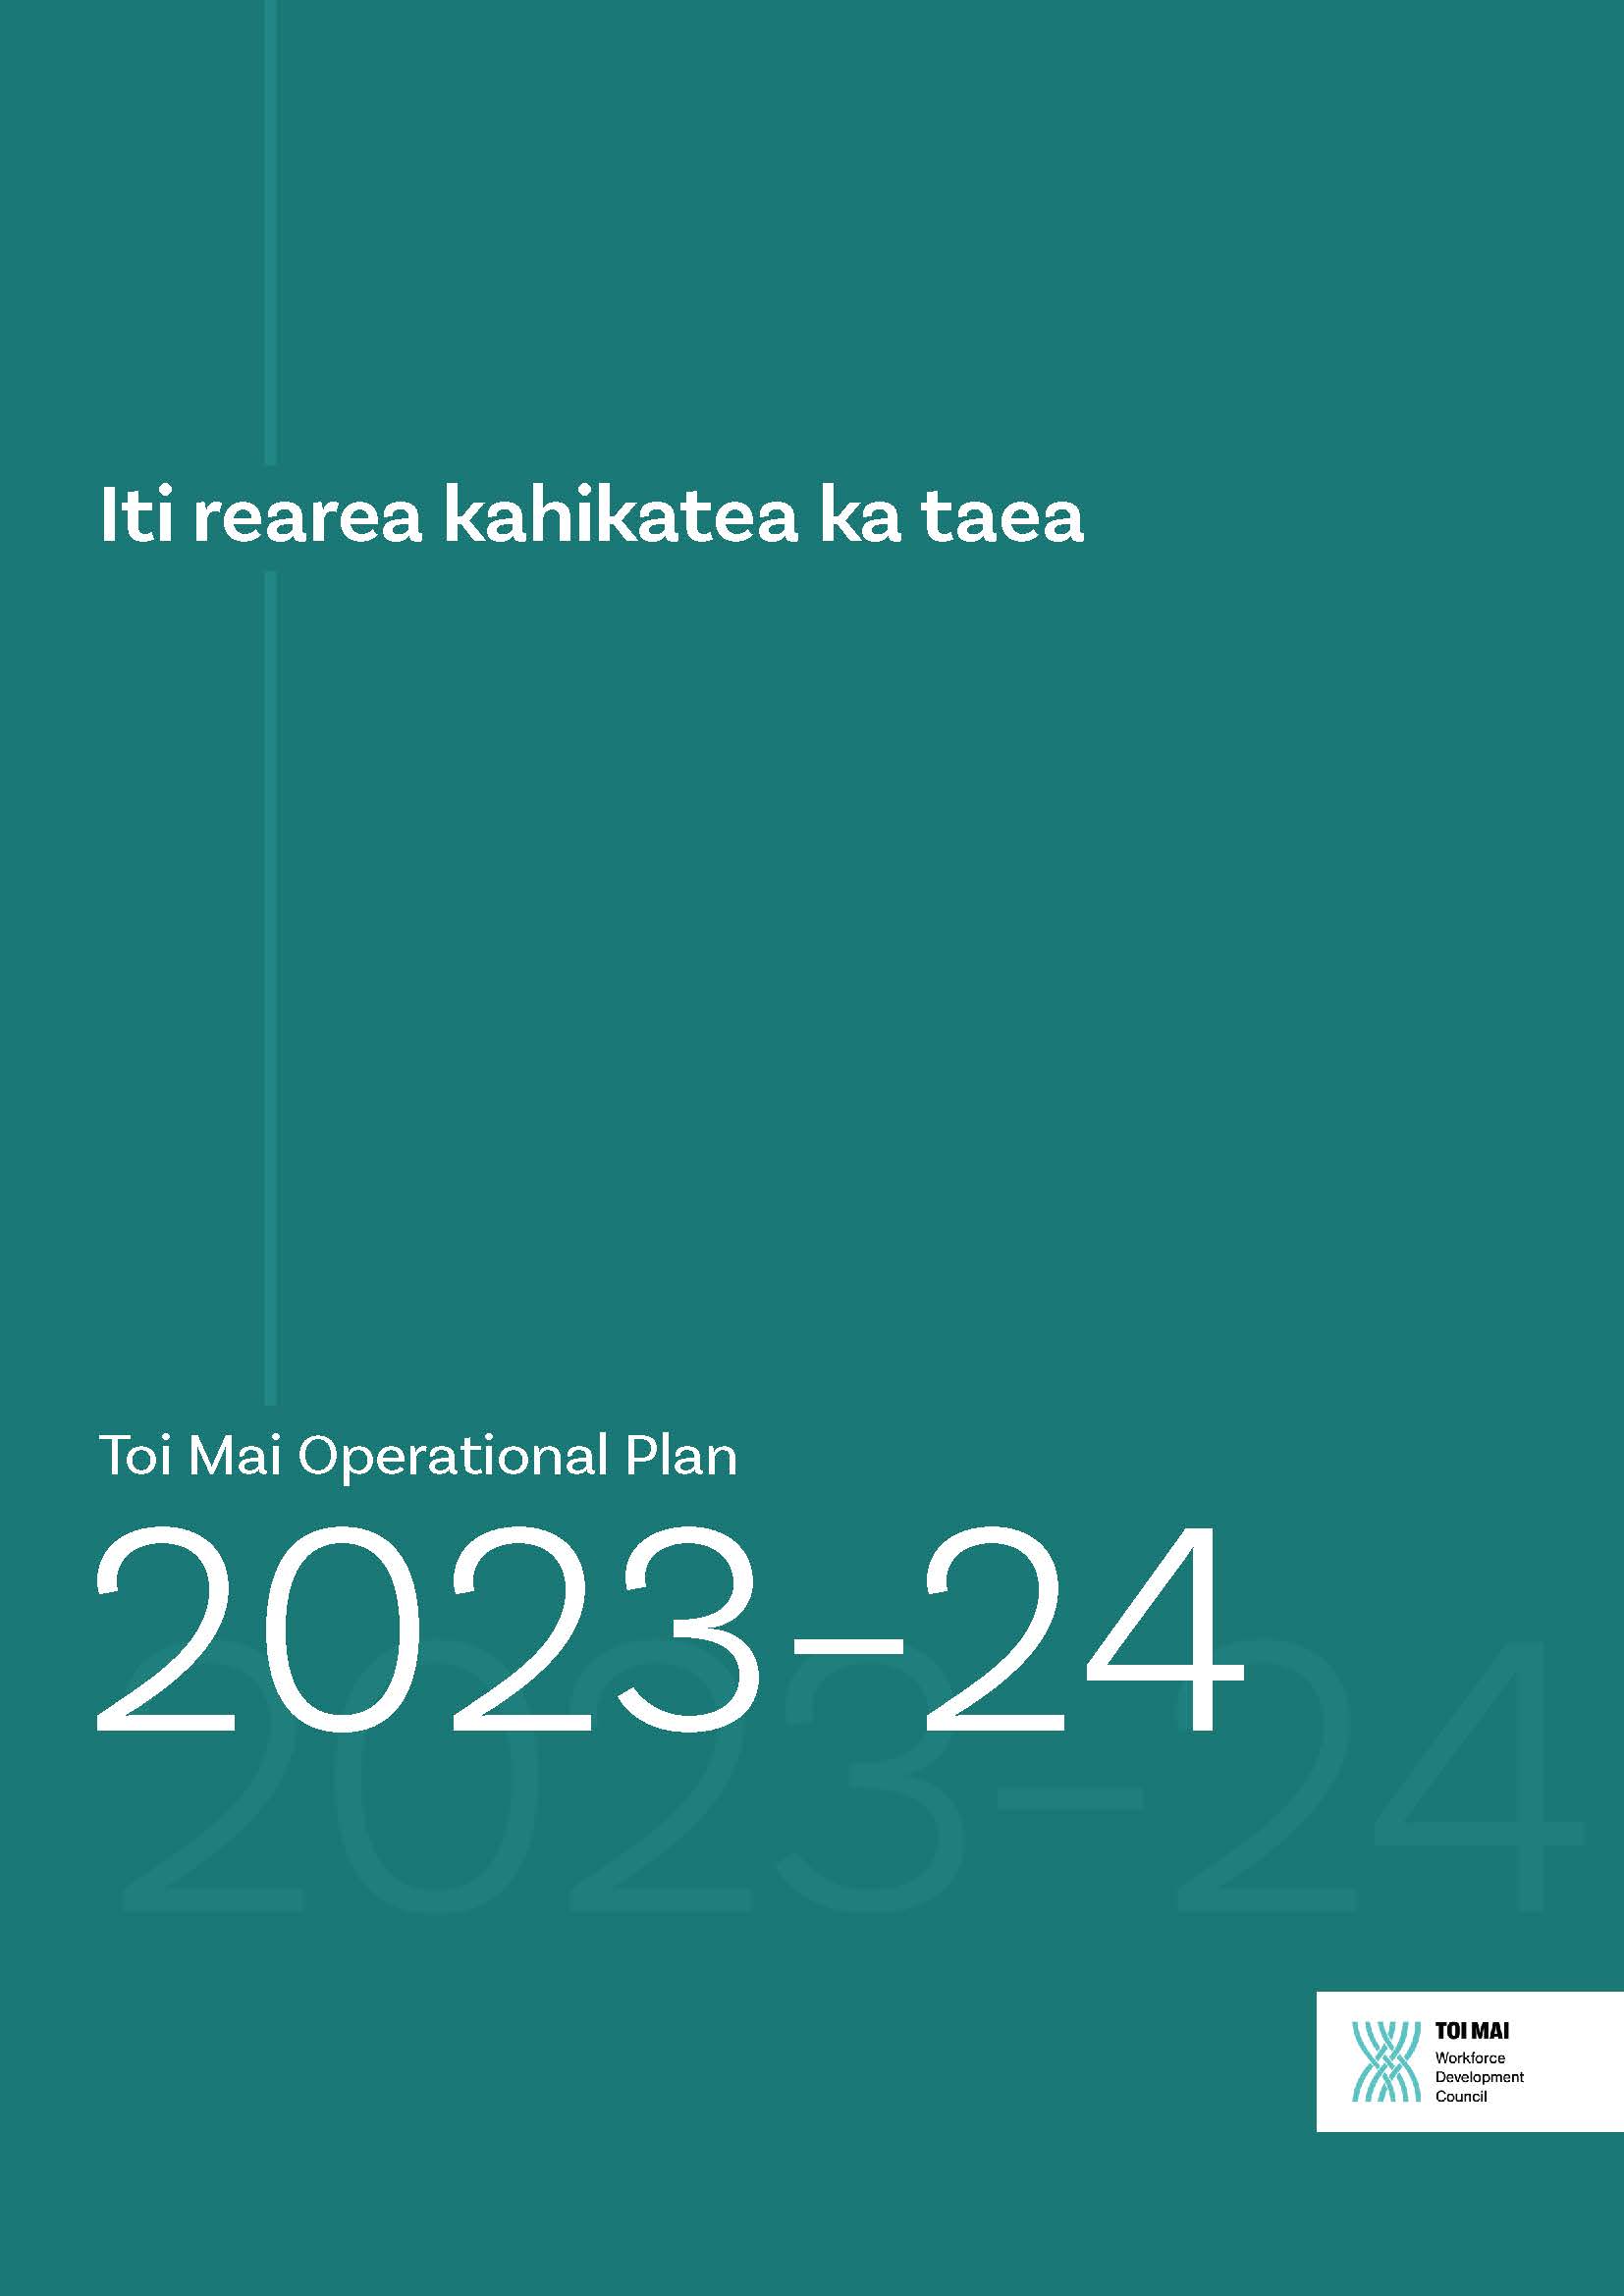 Report cover for the Toi Mai Operational Plan 2023-24